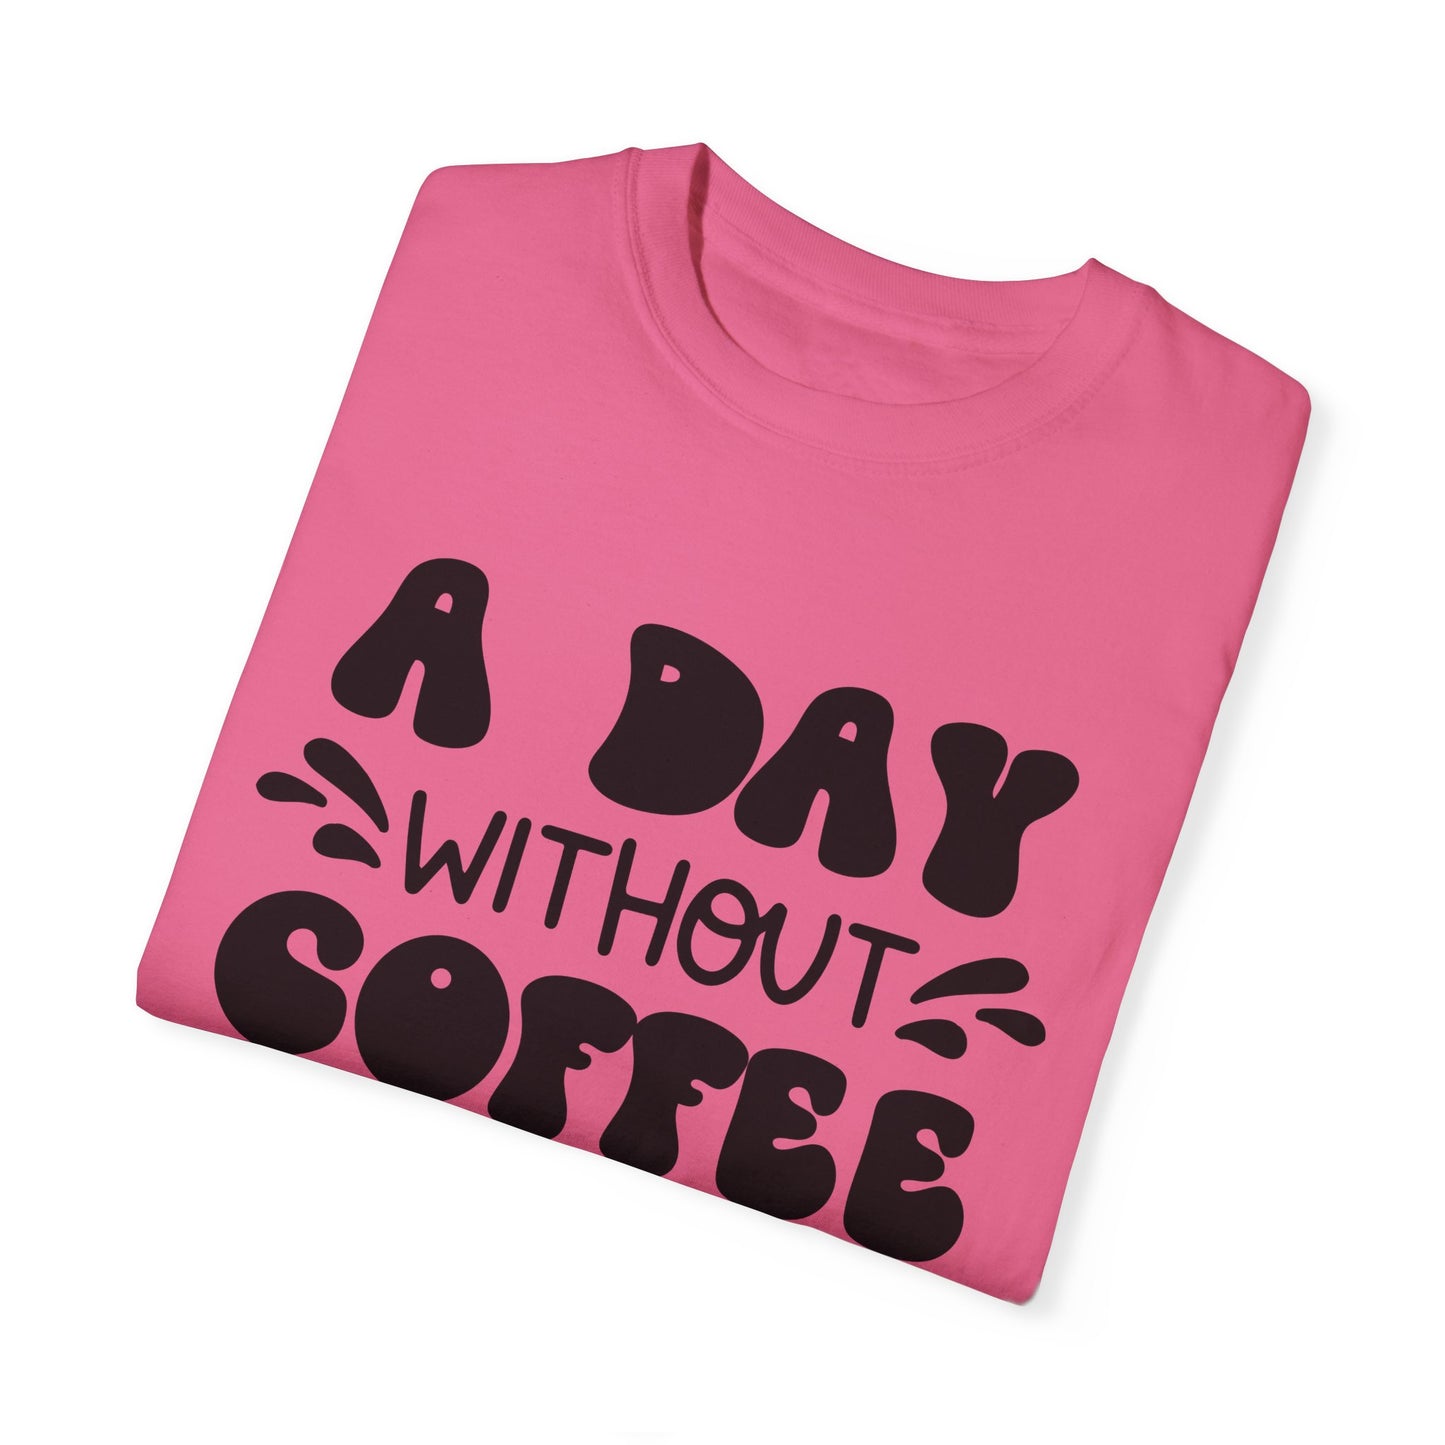 A day without coffee: Unisex Garment-Dyed T-shirt